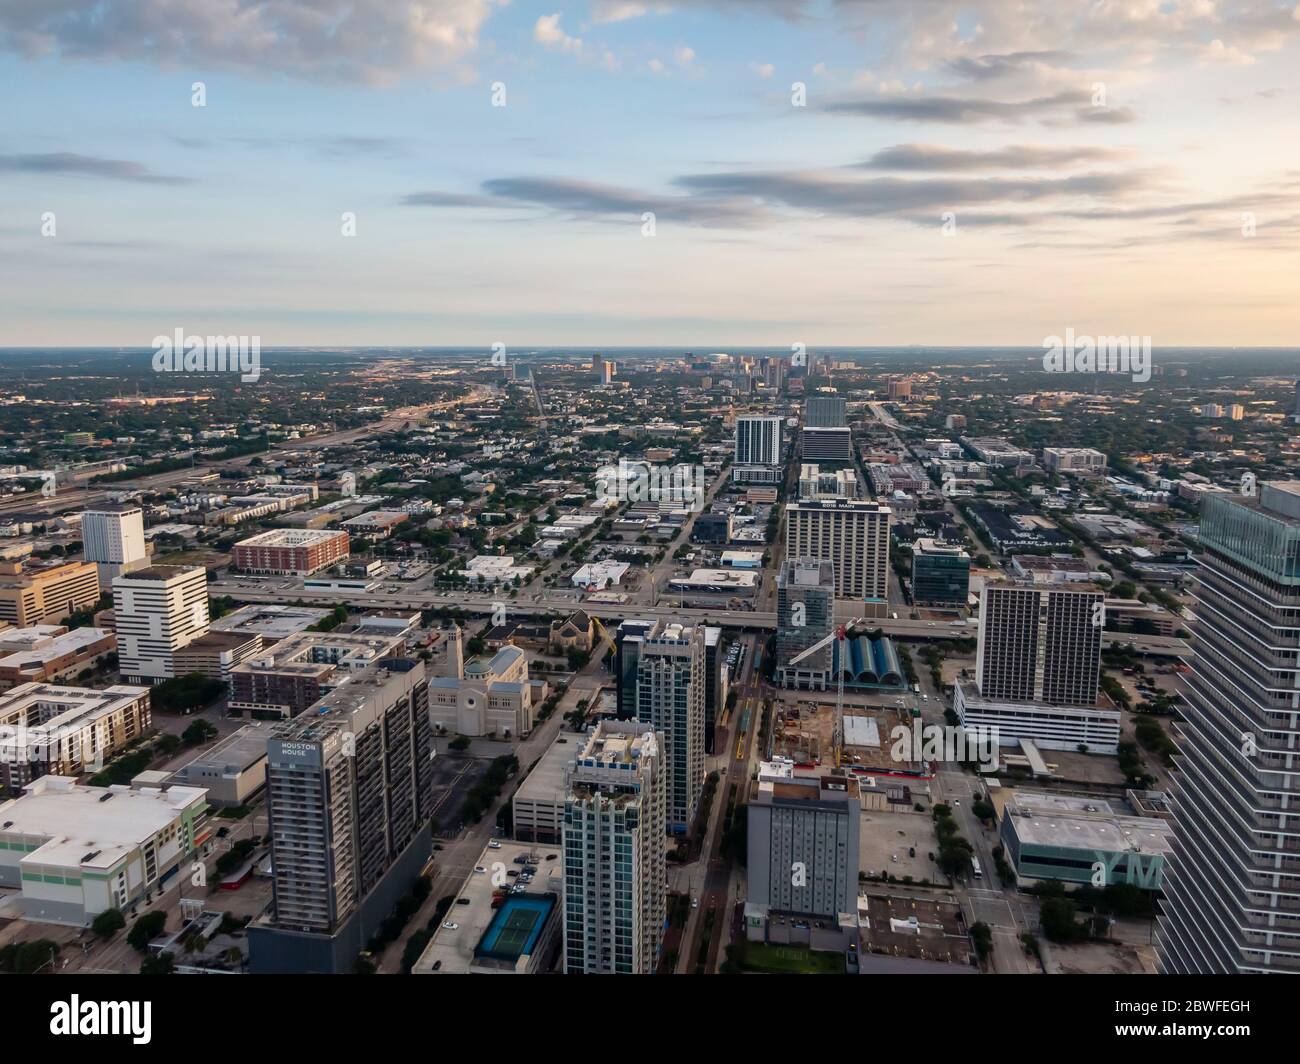 Houston, Texas, USA. 26th May, 2020. May 26, 2020 - Houston, Texas, USA: Houston is the most populous city in the U.S. state of Texas, fourth most populous city in the United States. Credit: Walter G Arce Sr Grindstone Medi/ASP/ZUMA Wire/Alamy Live News Stock Photo